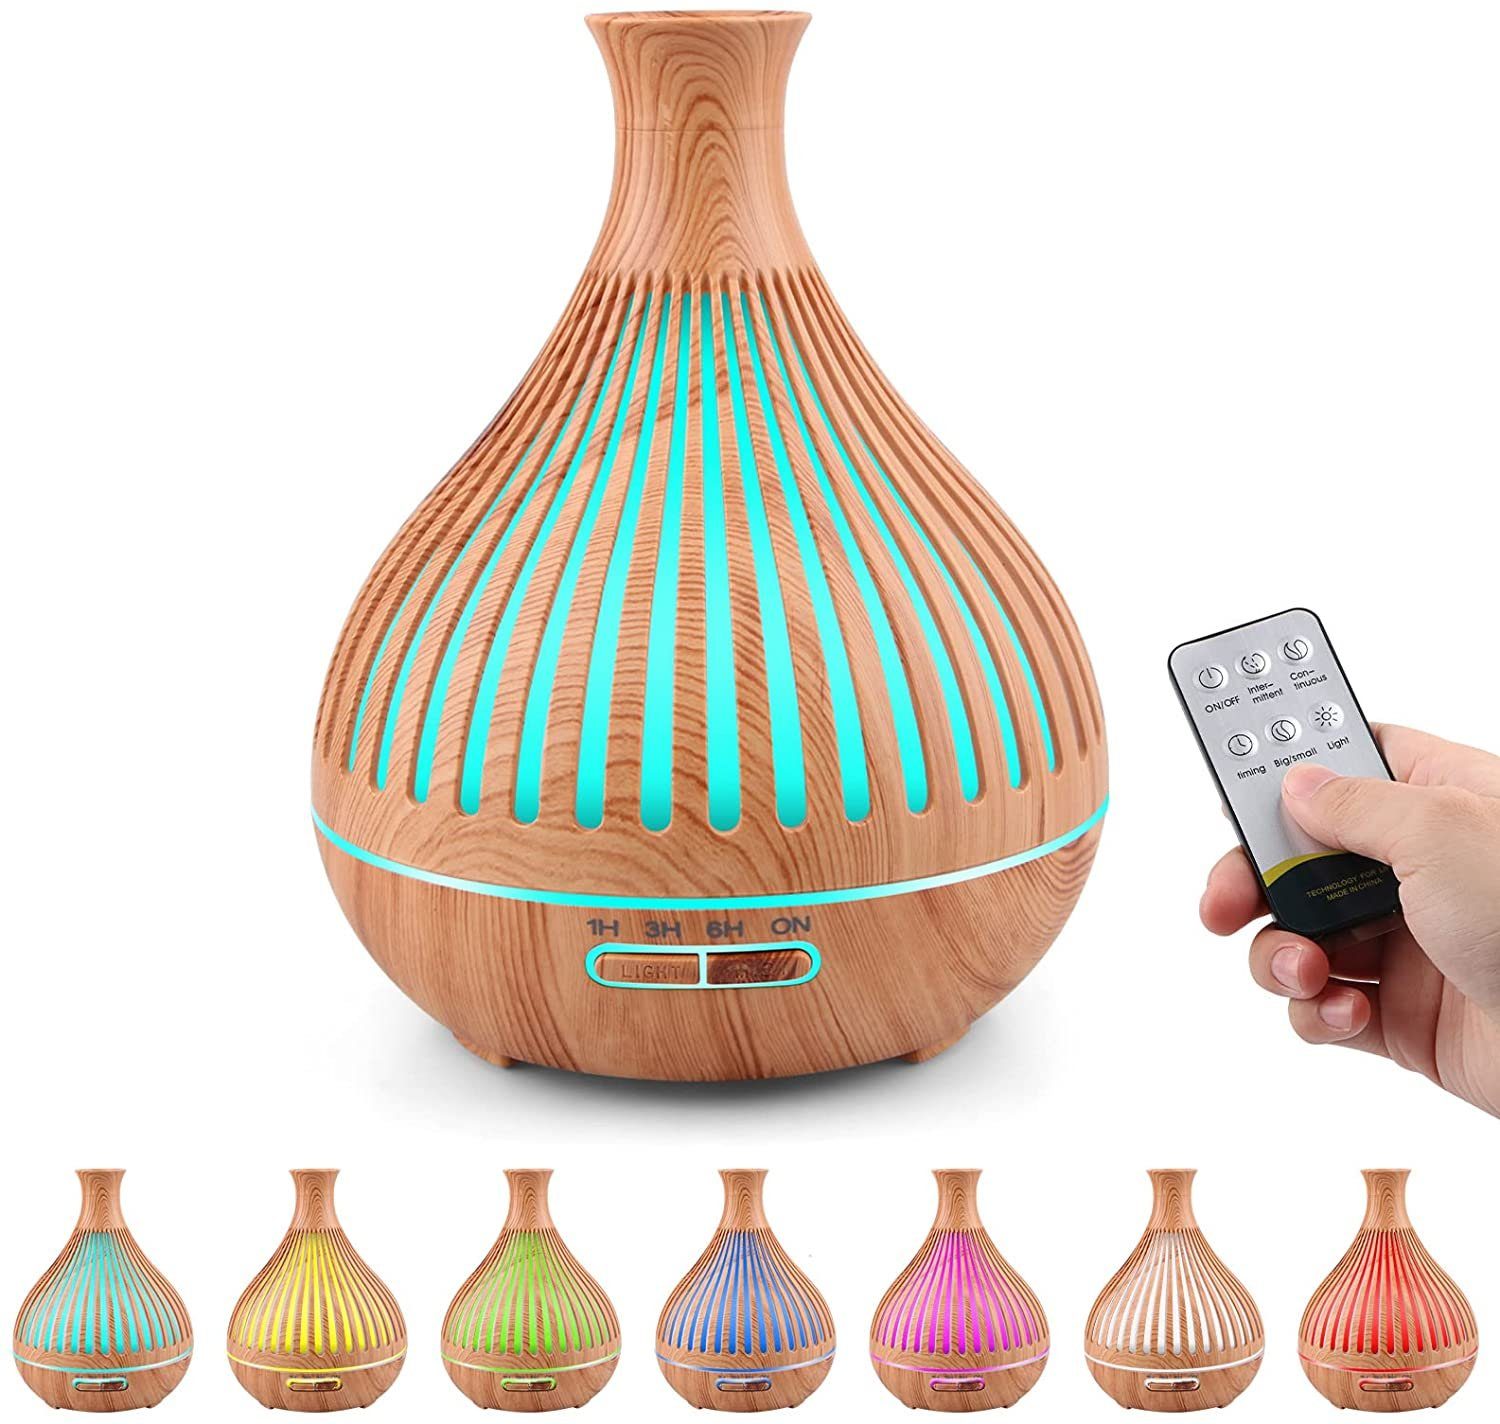 3 in 1 LED Ultraschall Luftbefeuchter Aroma Diffuser Aromatherapie Duftlampe USB 